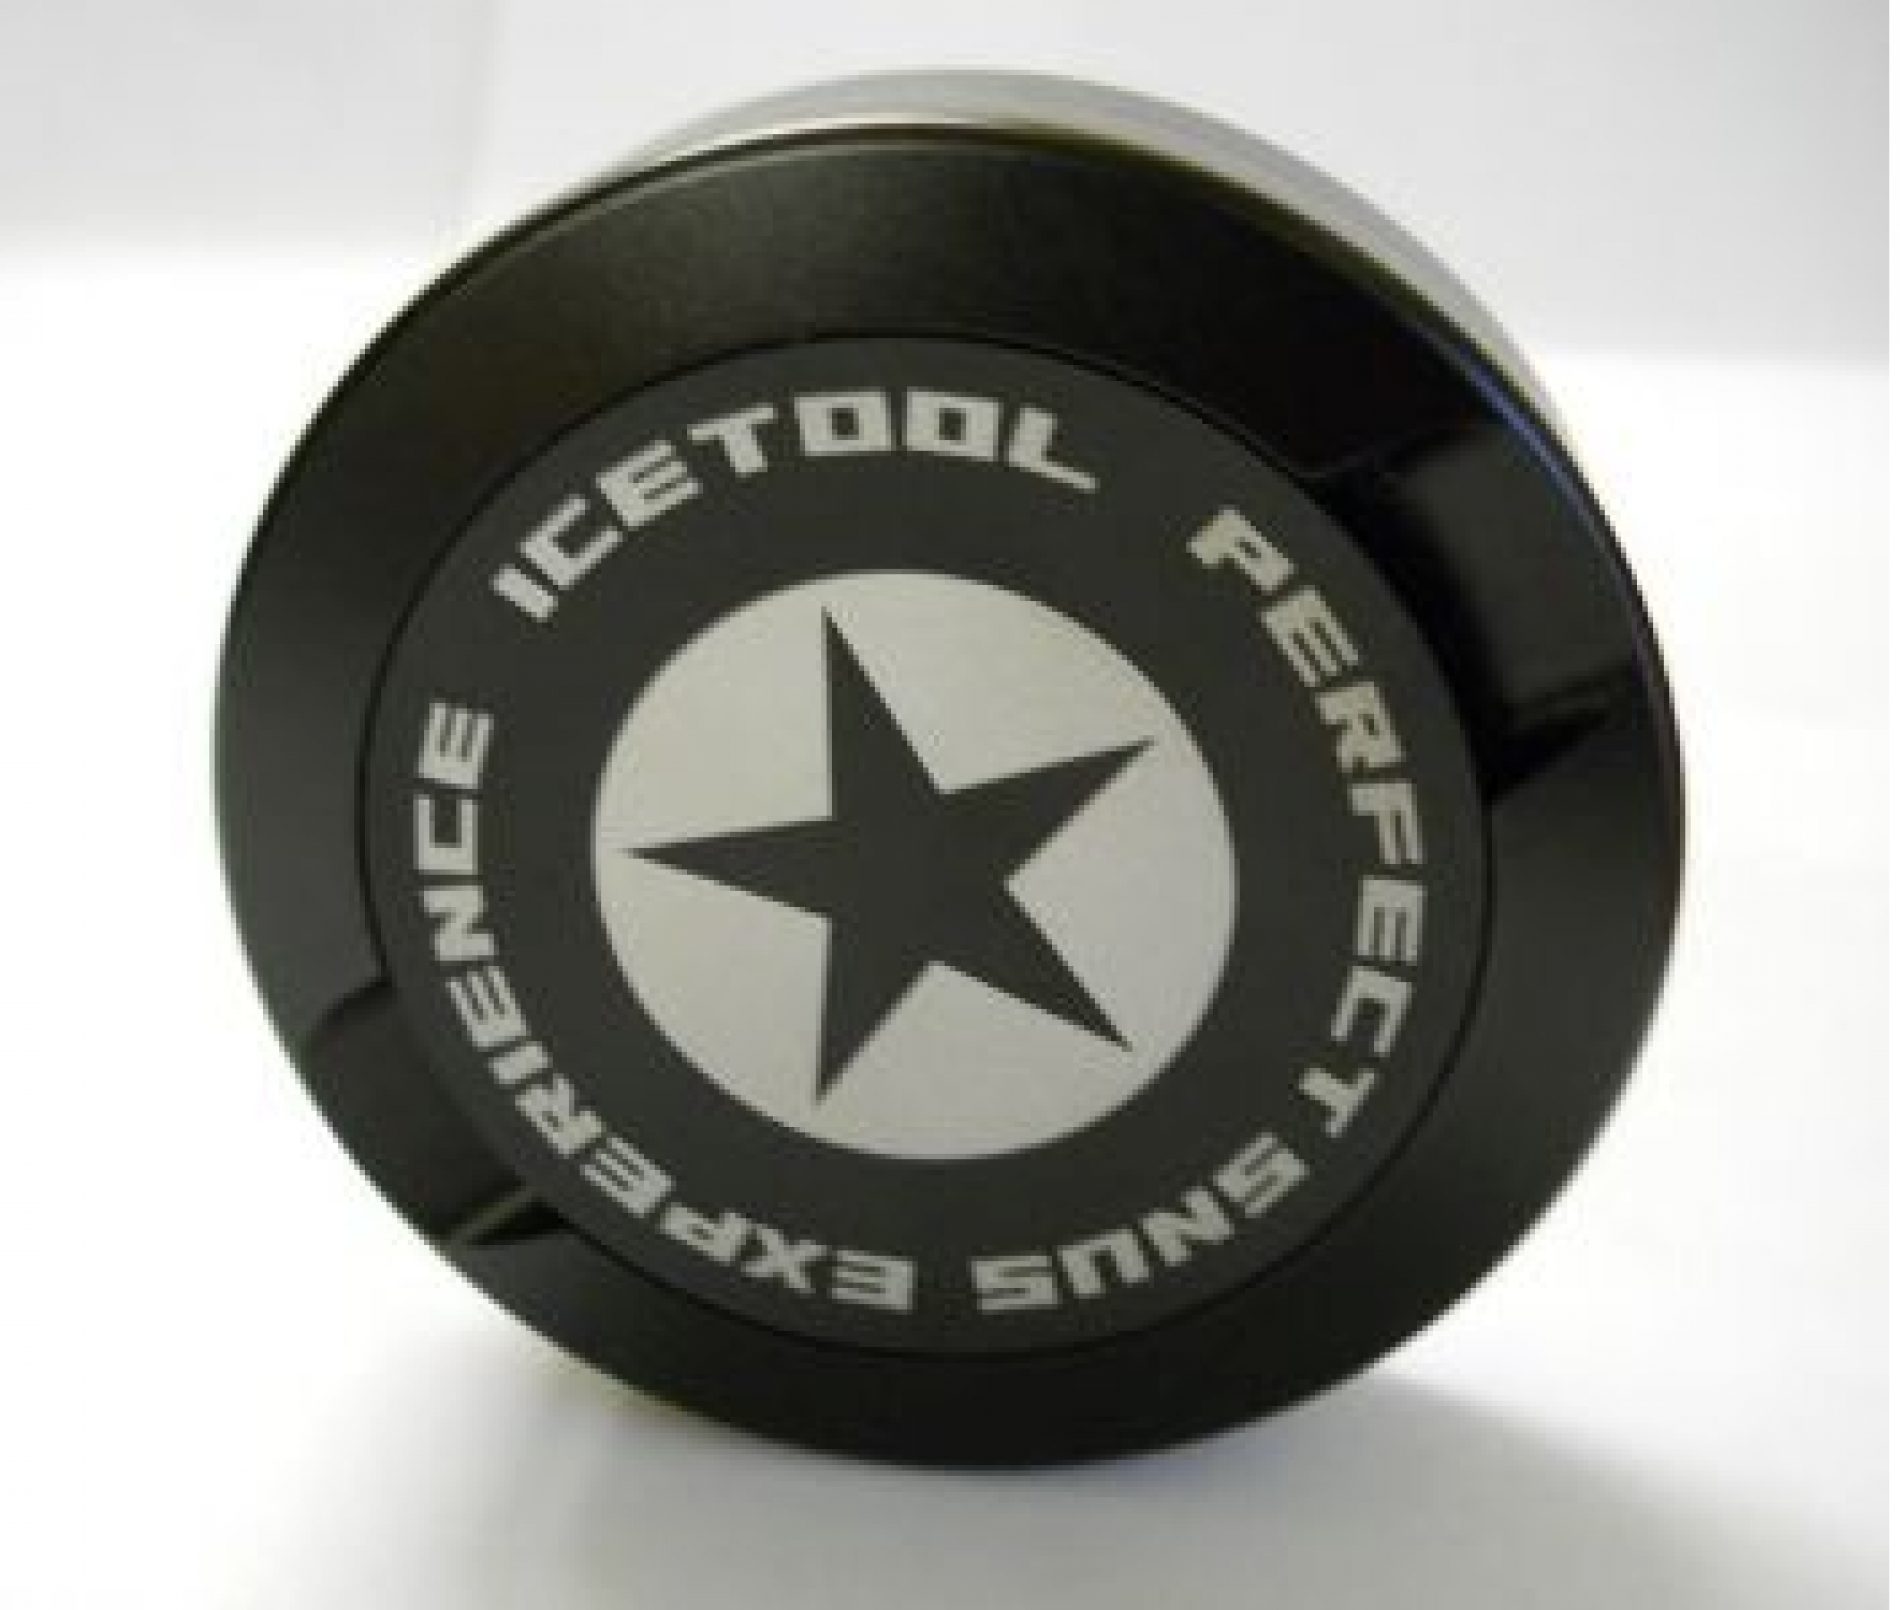 Icetool Lid Box Portion Snus Can Review